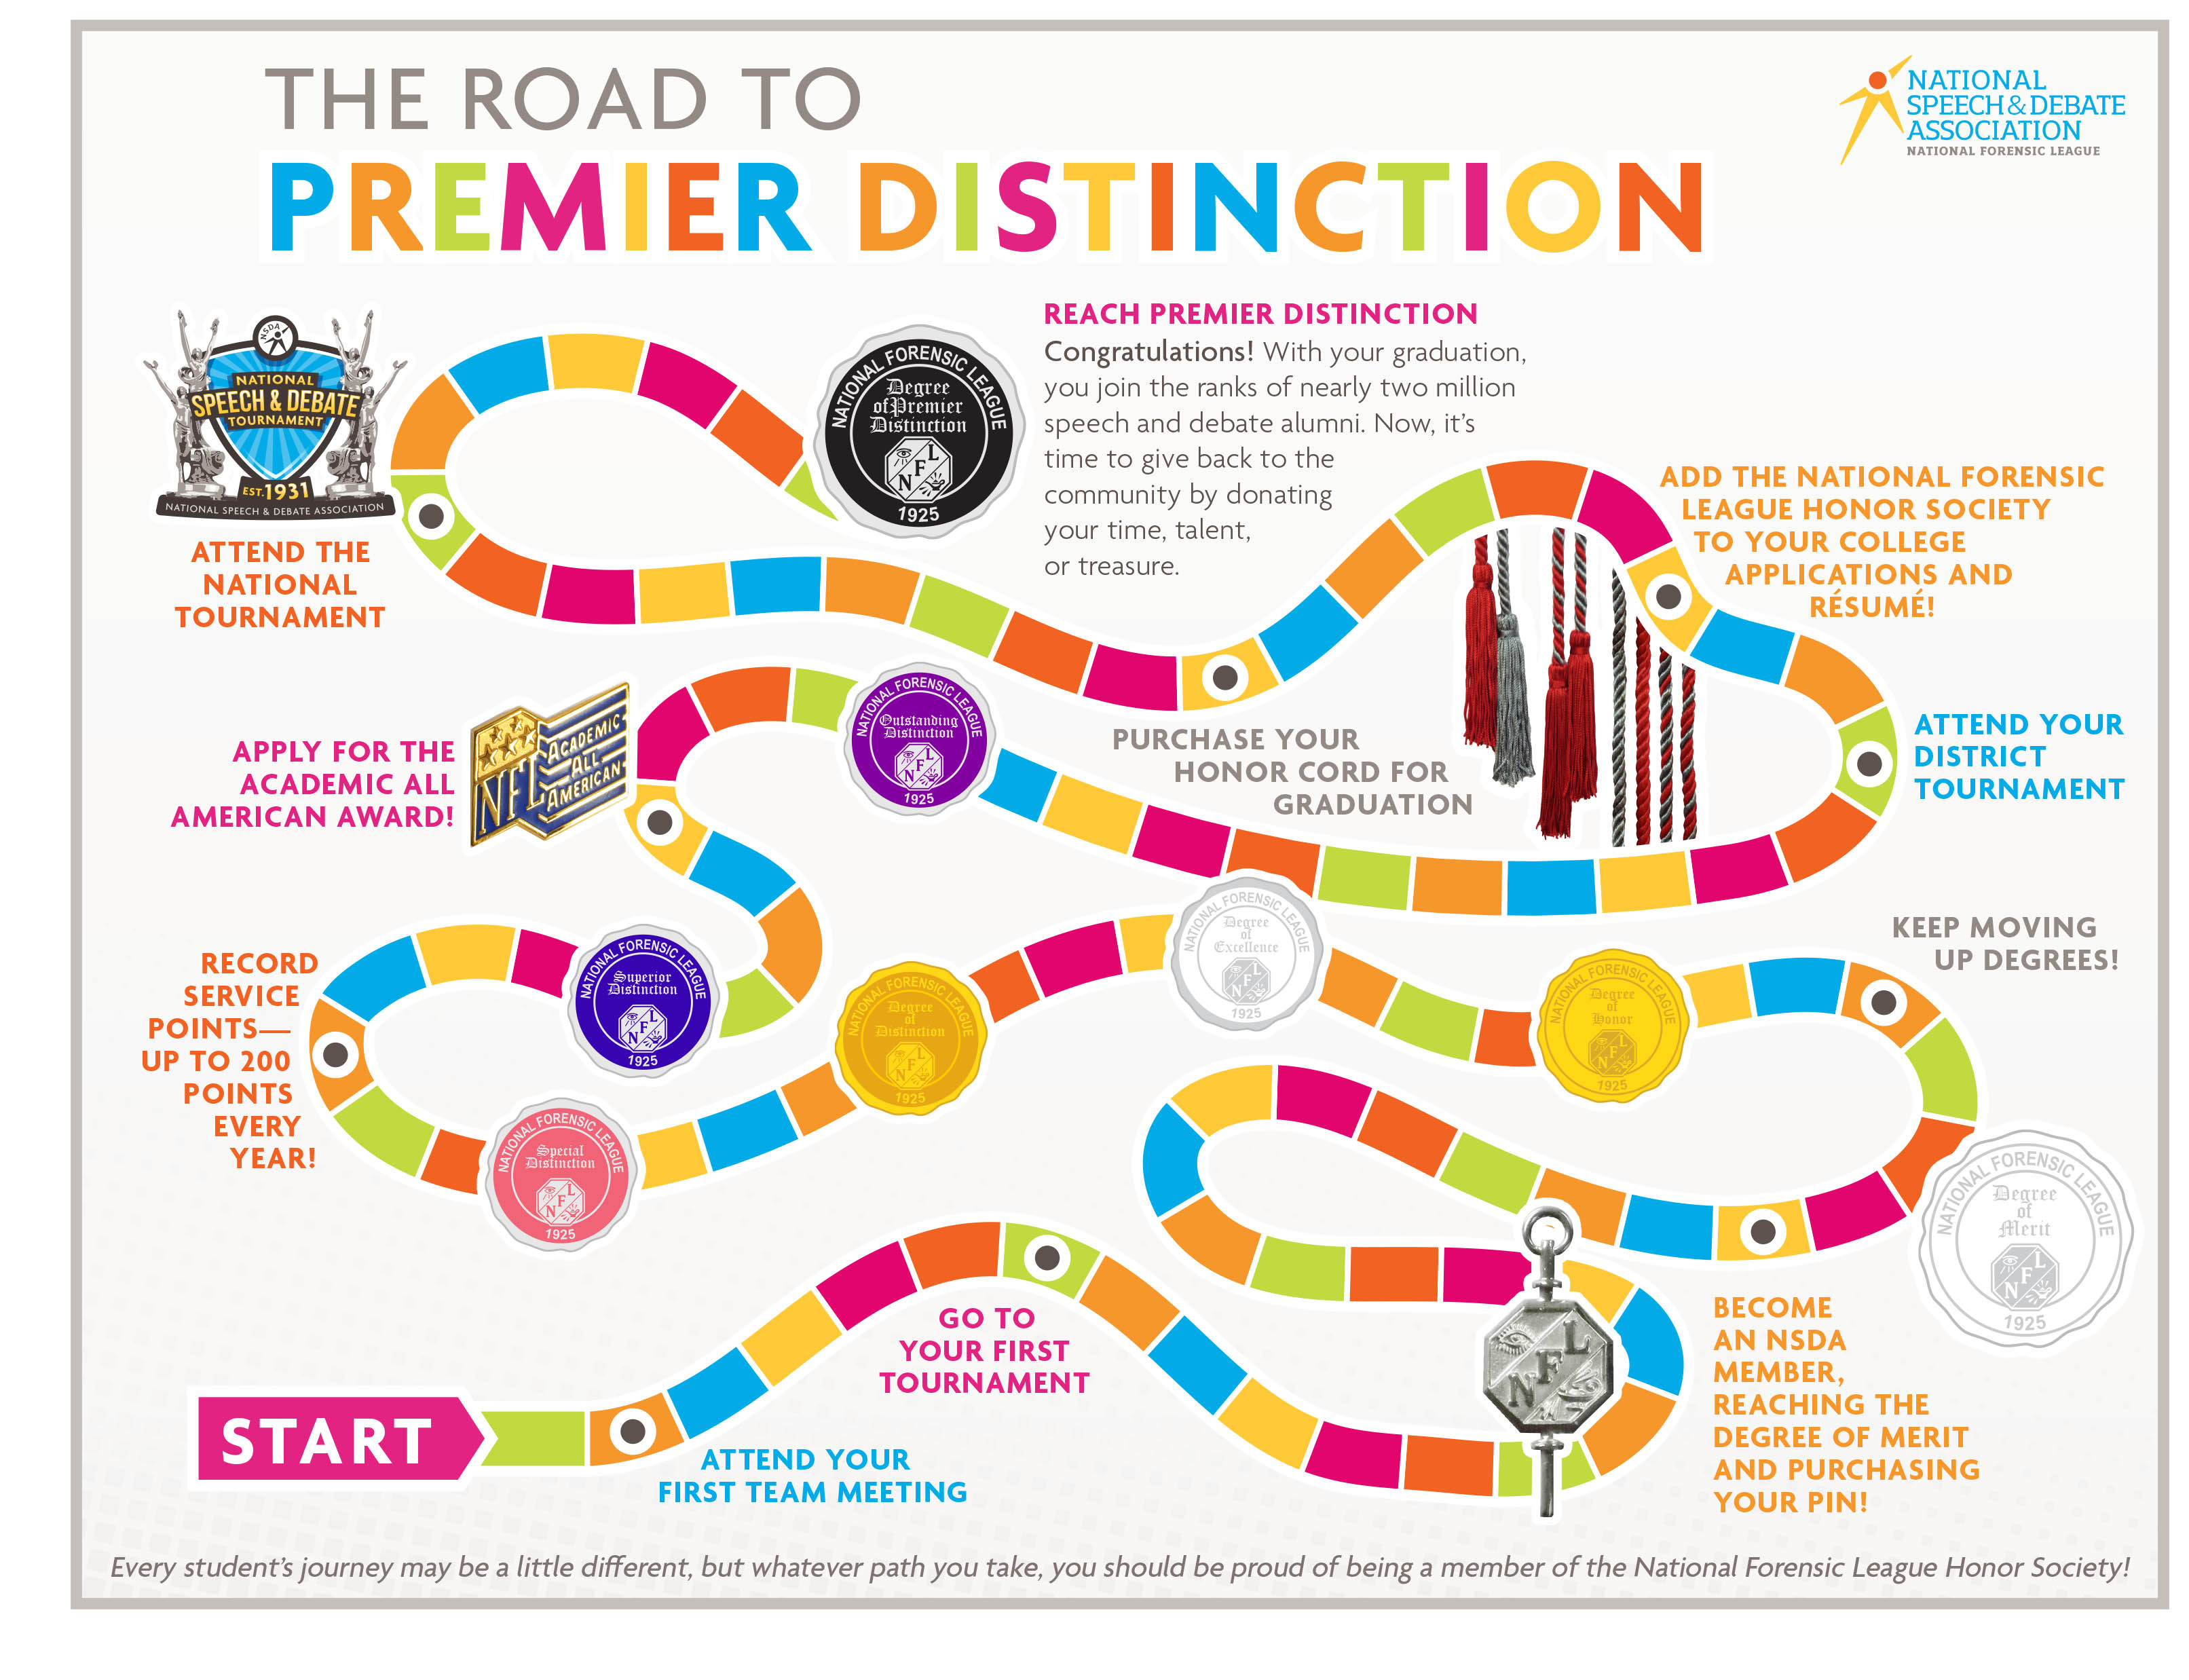 The Road to Premier Distinction